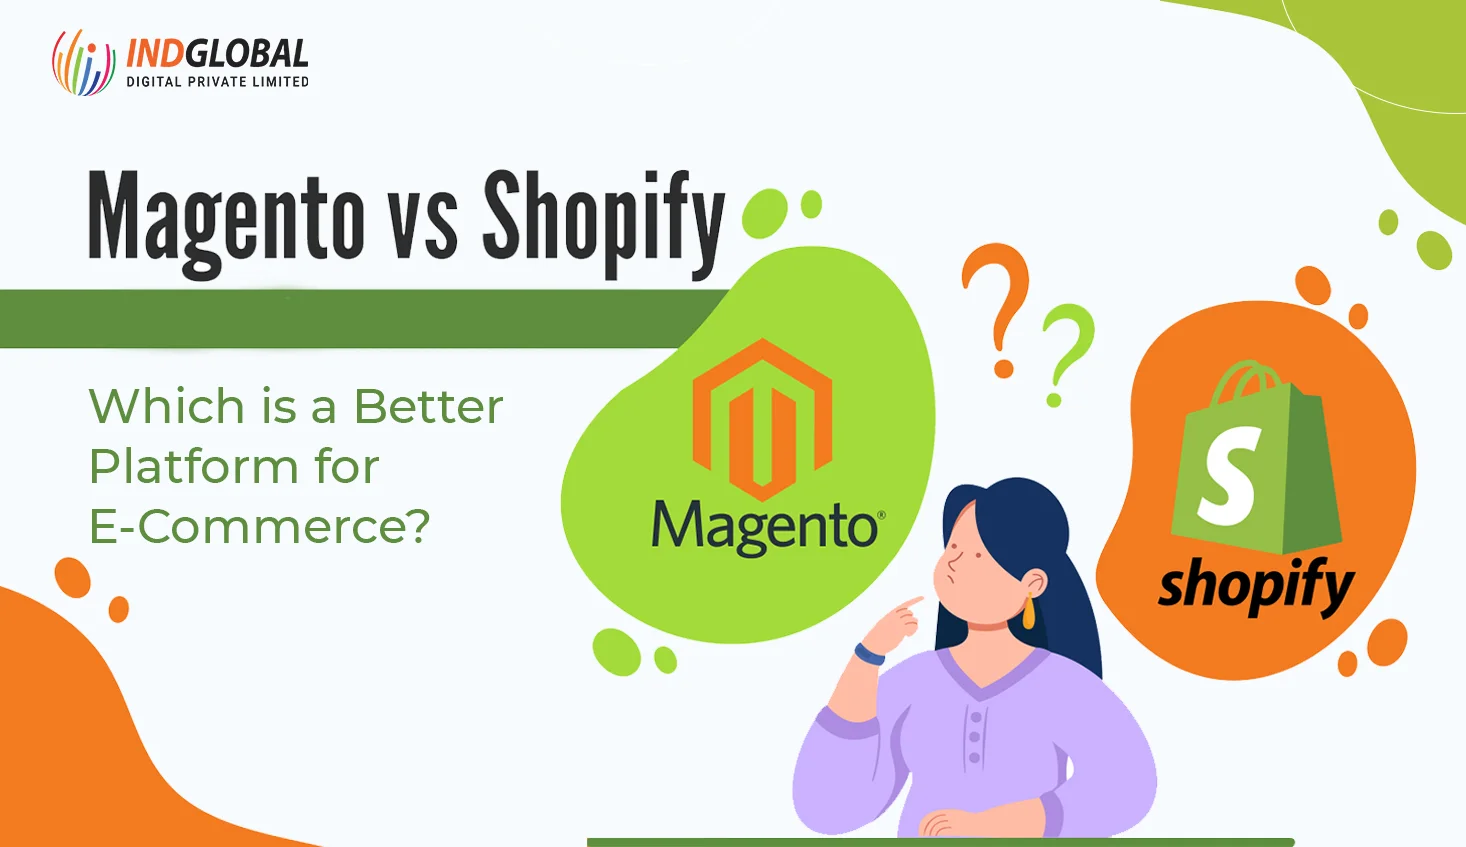 Magento vs Shopify ? Which is a better platform for ecommerce?